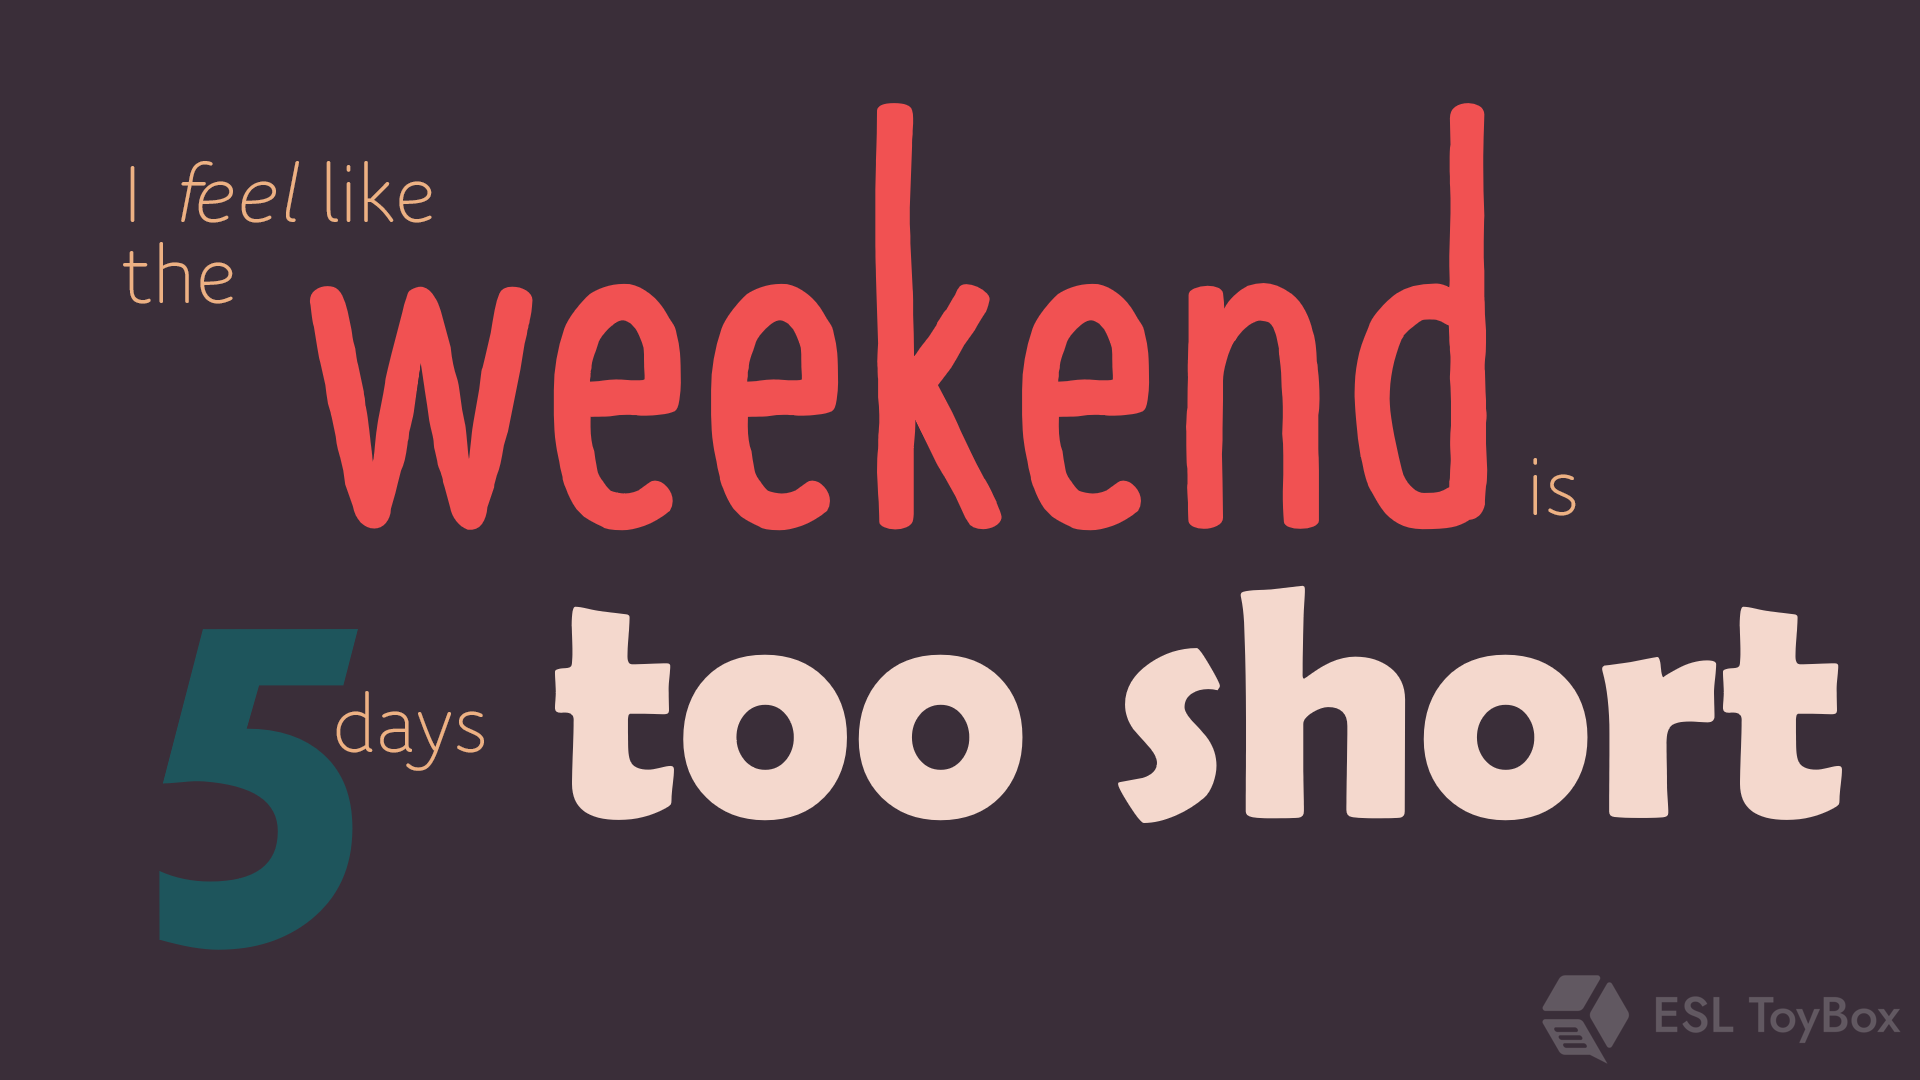 I Feel Like the Weekend is 5 Days Too Short!